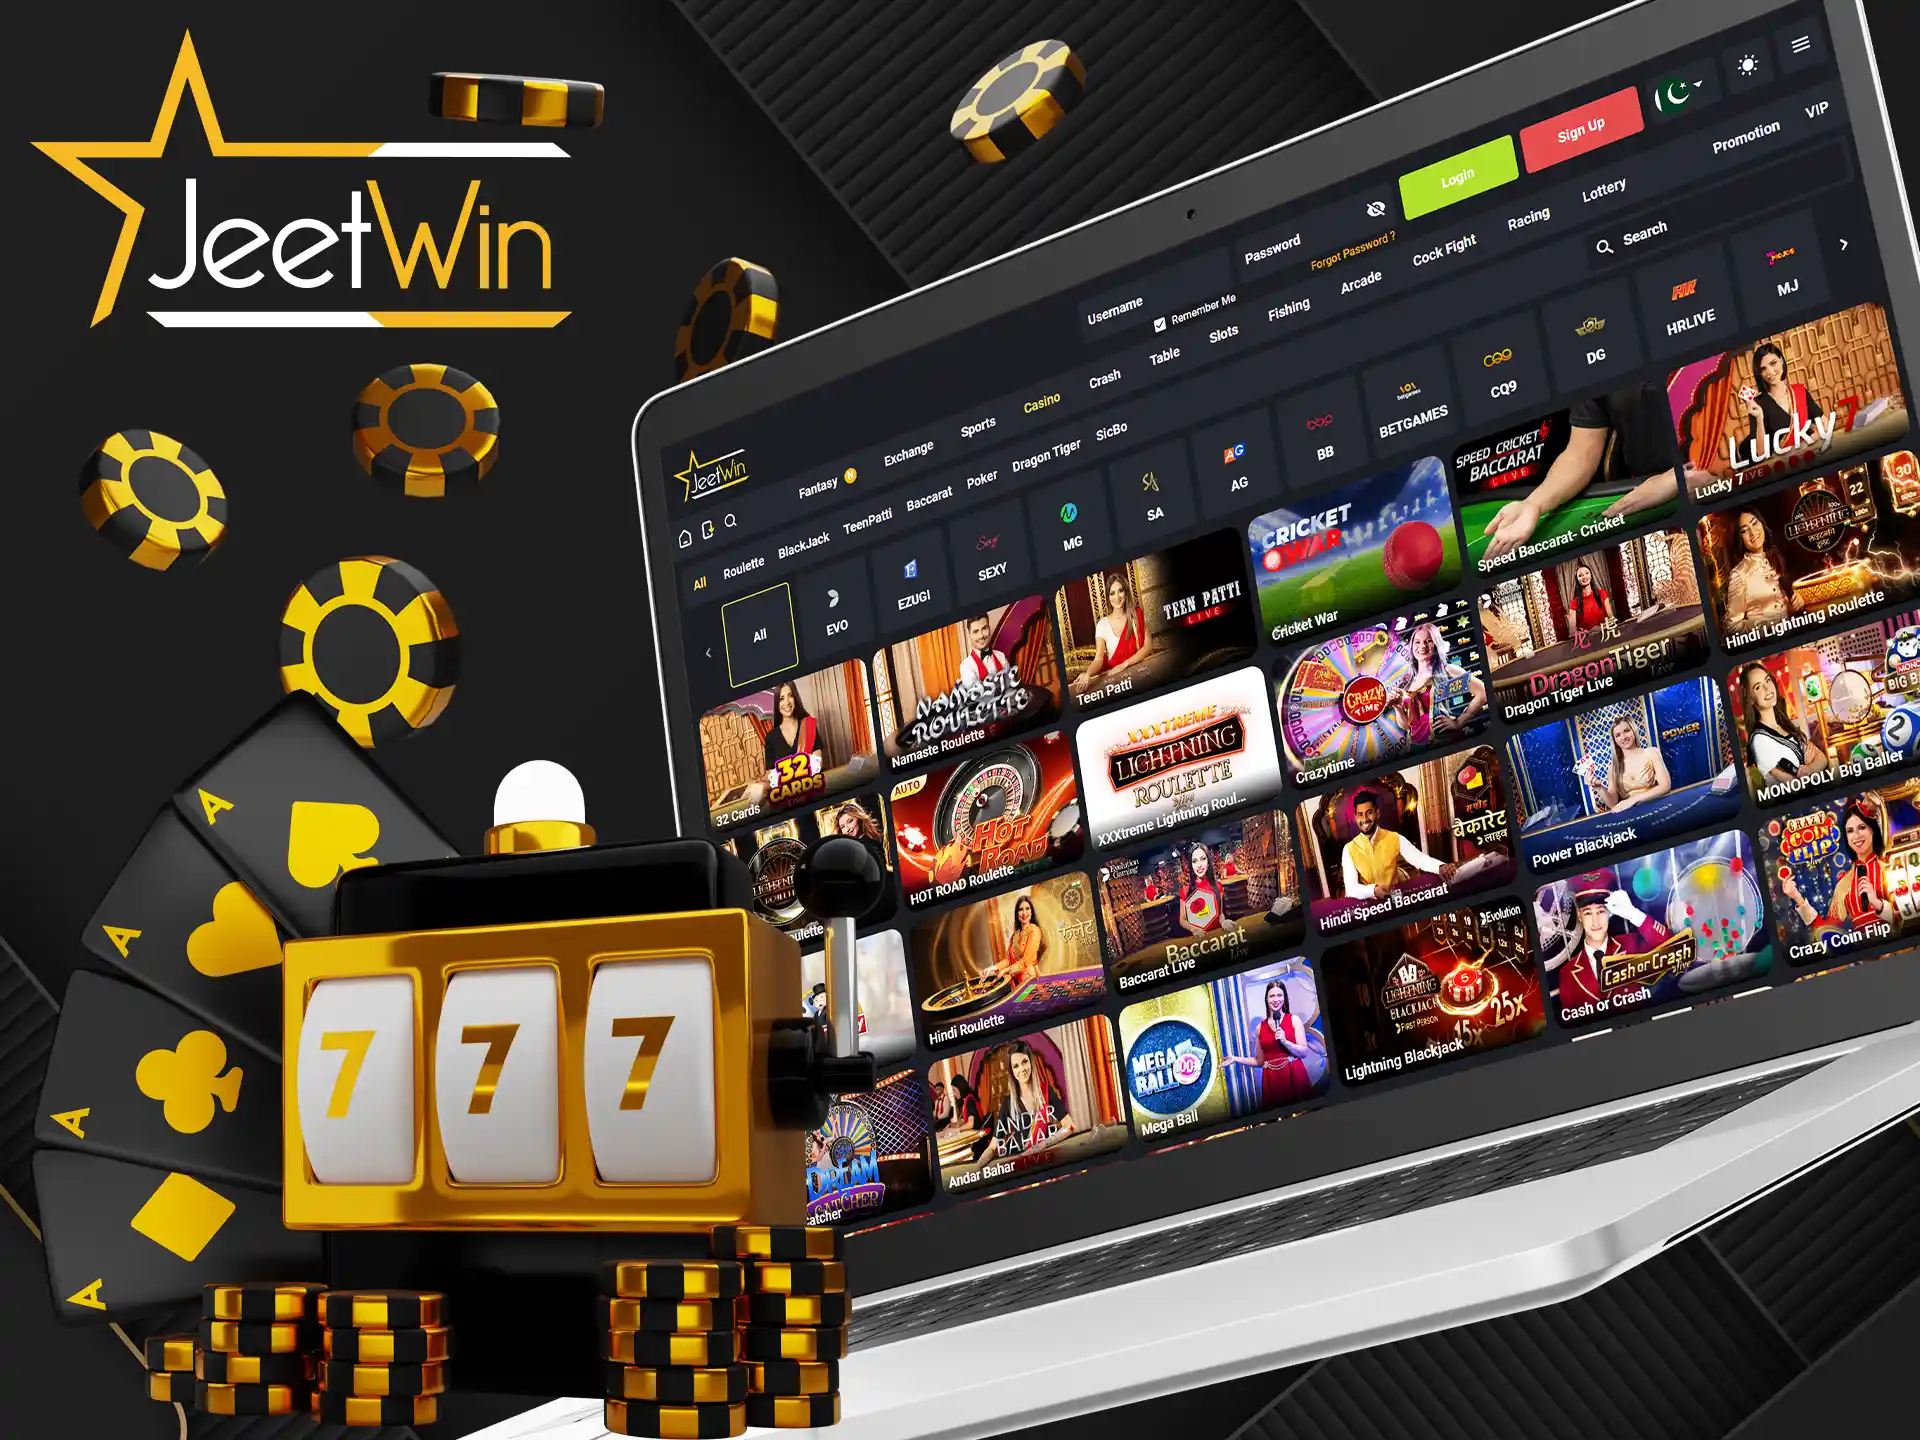 JeetWin offers an immersive experience in the world of gambling and live casinos.